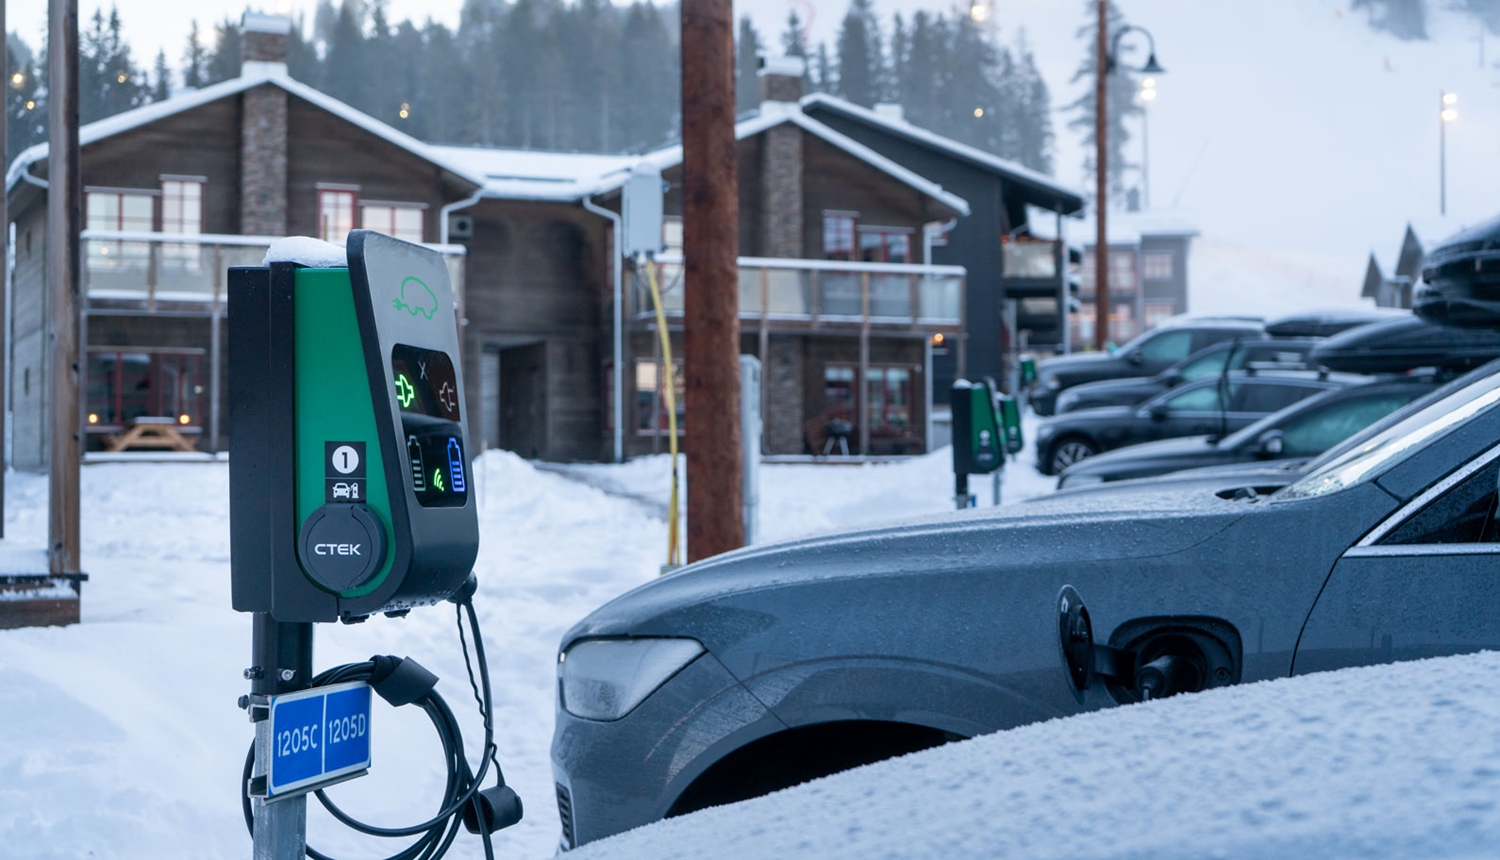 Getting the best out of your EV during the winter